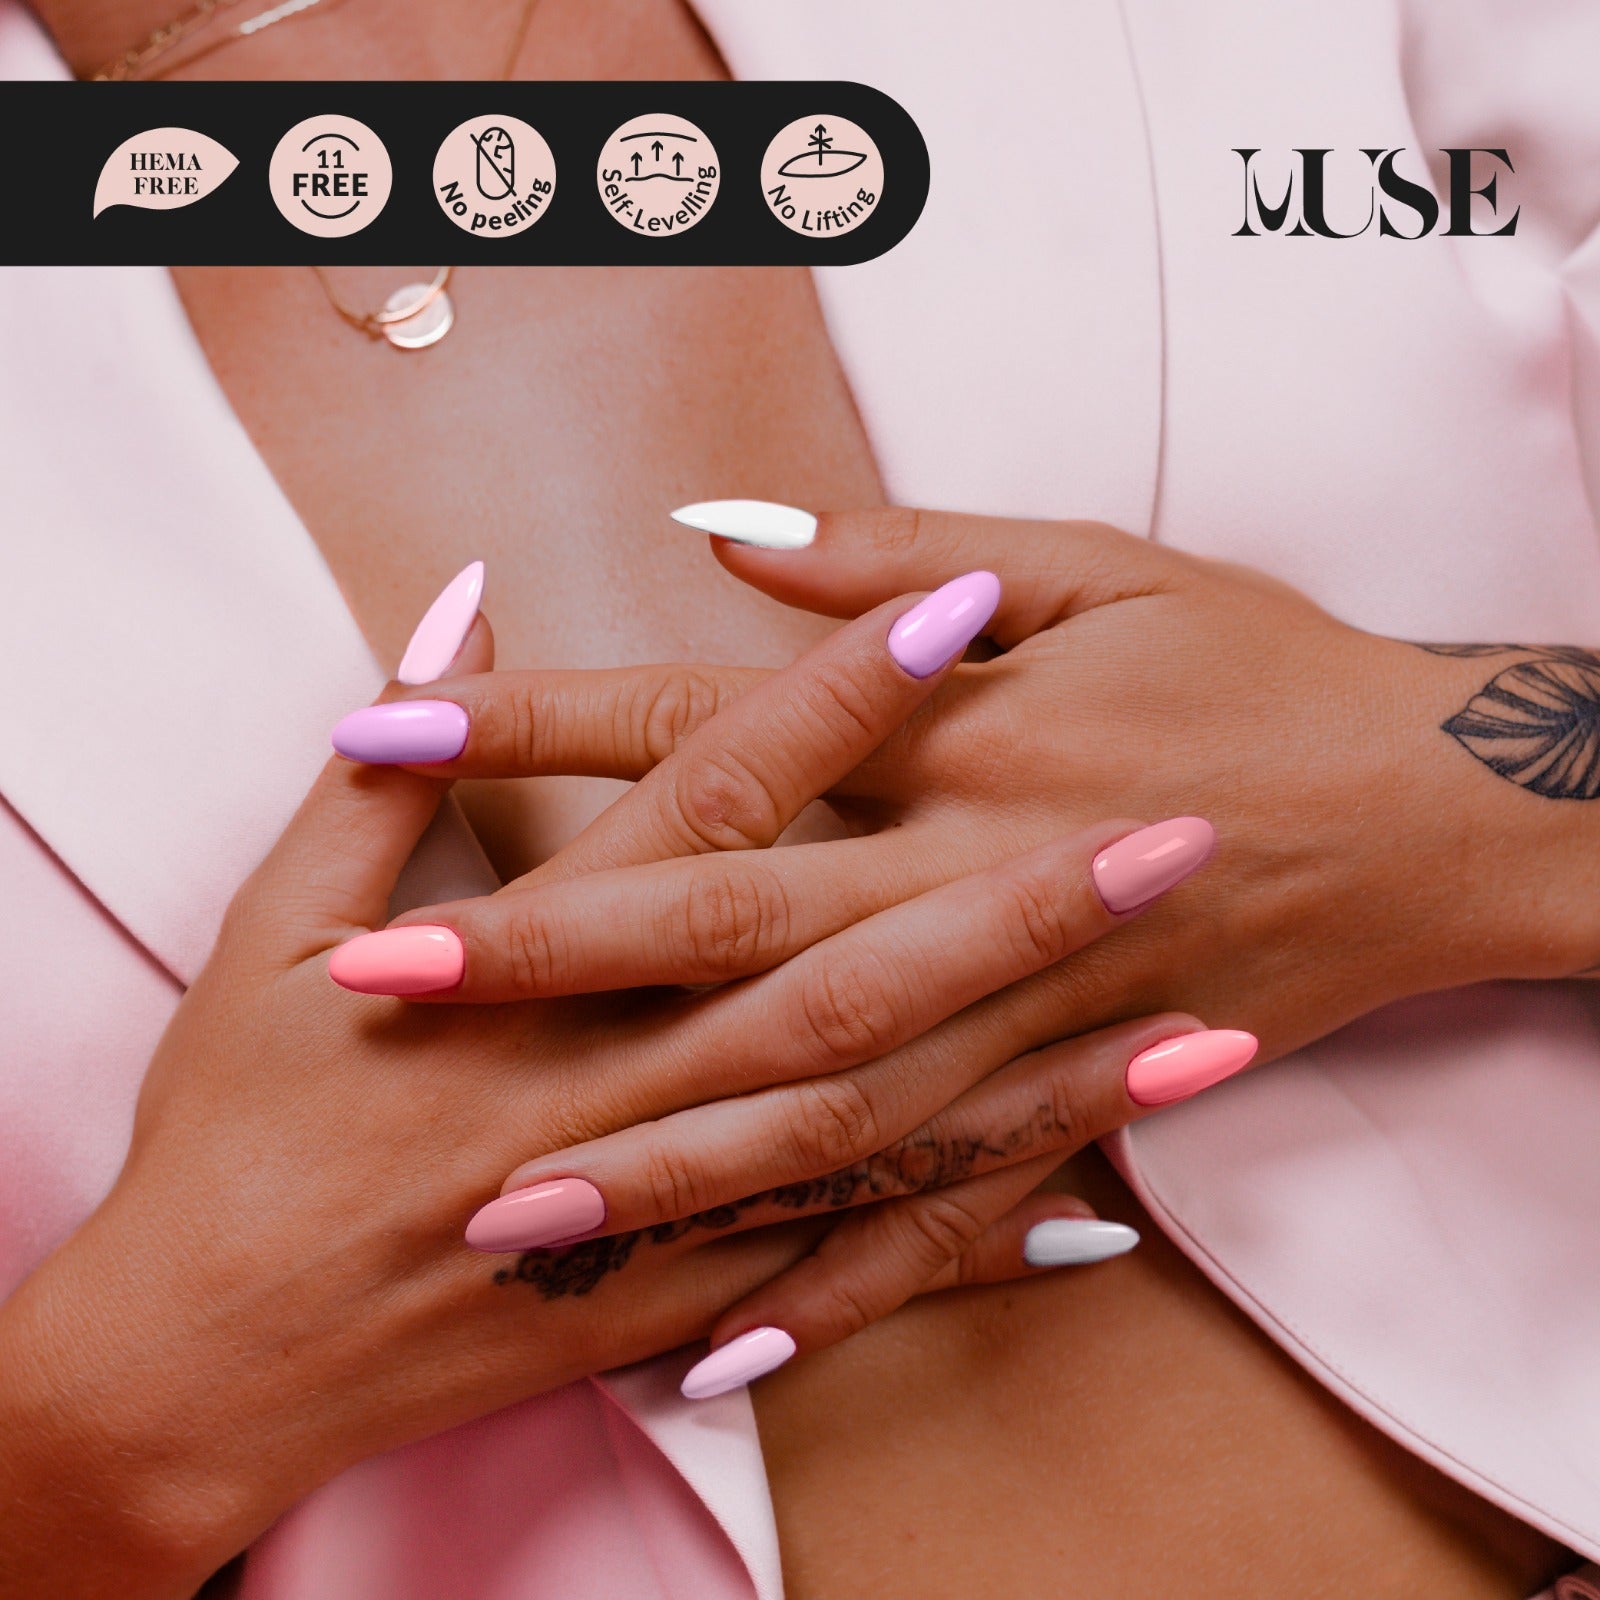 The image displays hands with pink and white stiletto nails, with icons highlighting the polish's health and quality features, and the MUSE logo.